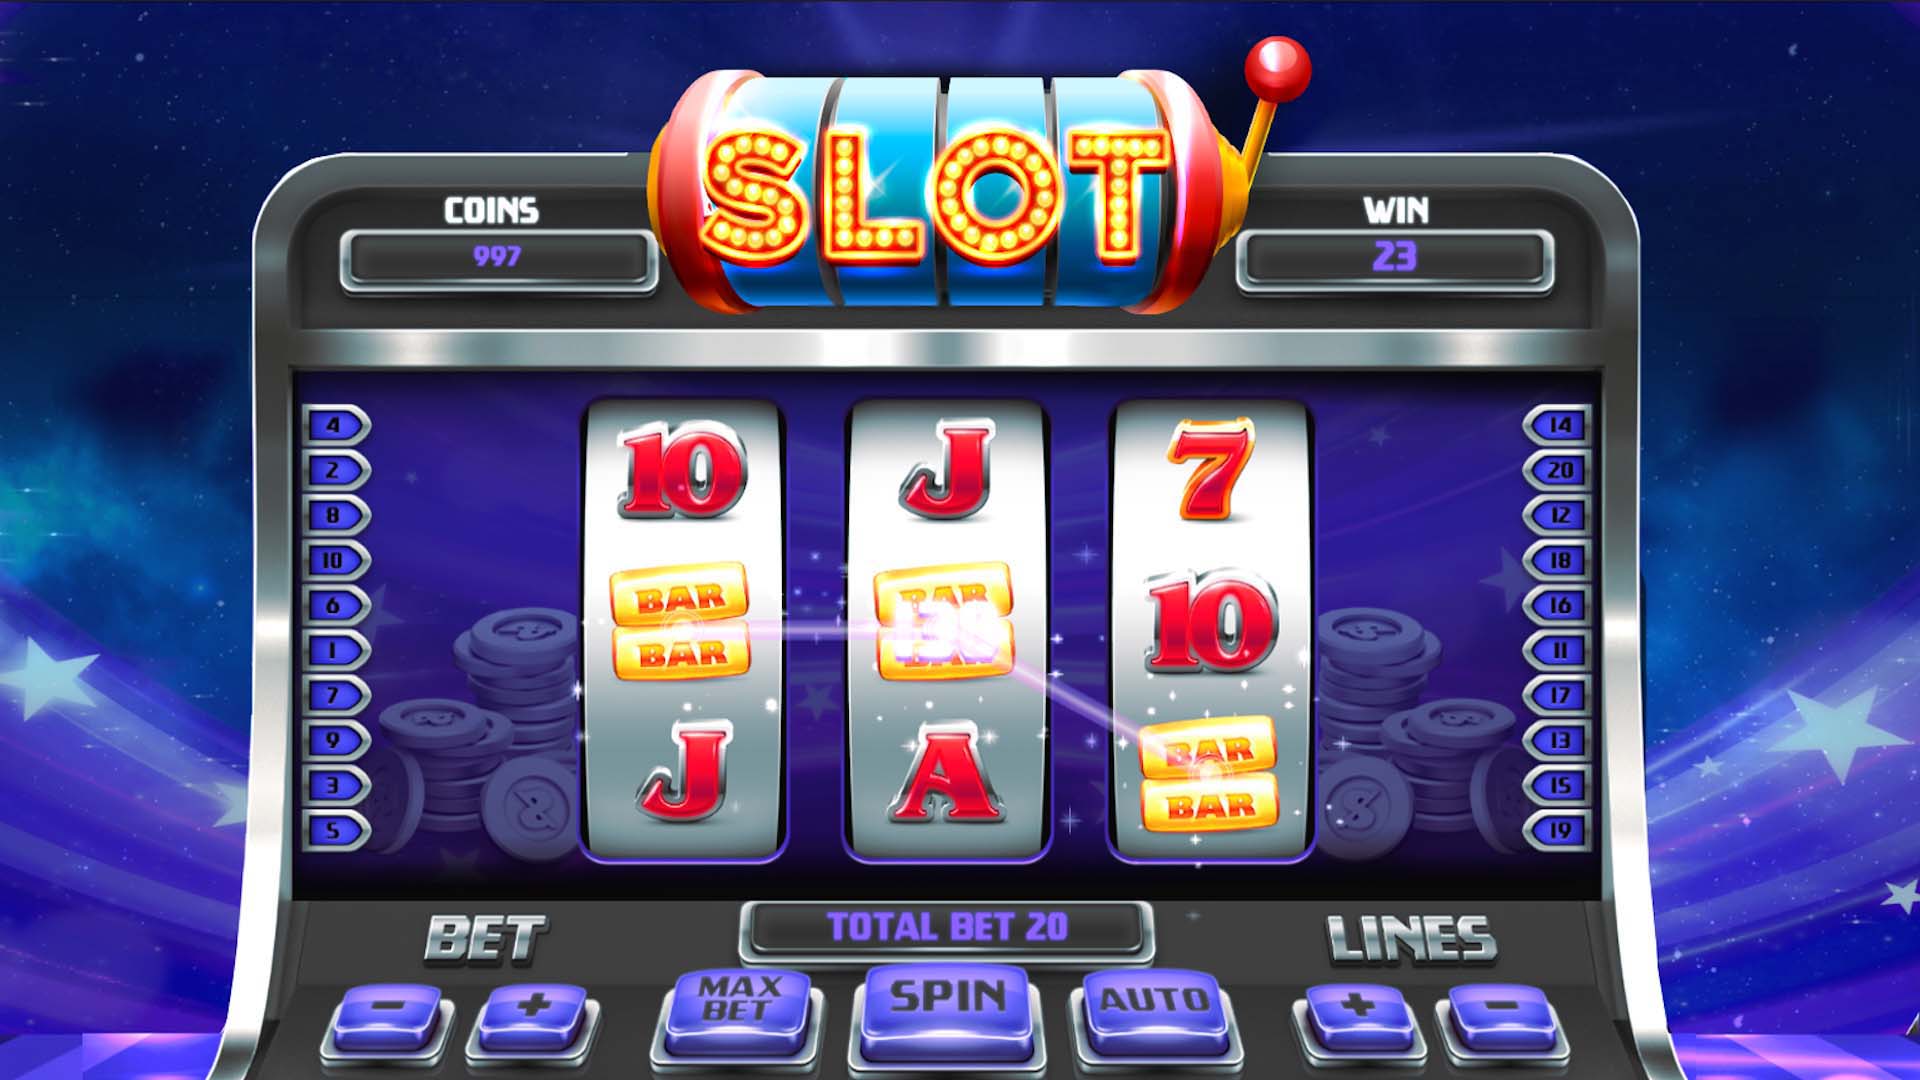 What are the finest accessible bonuses for online casino games?